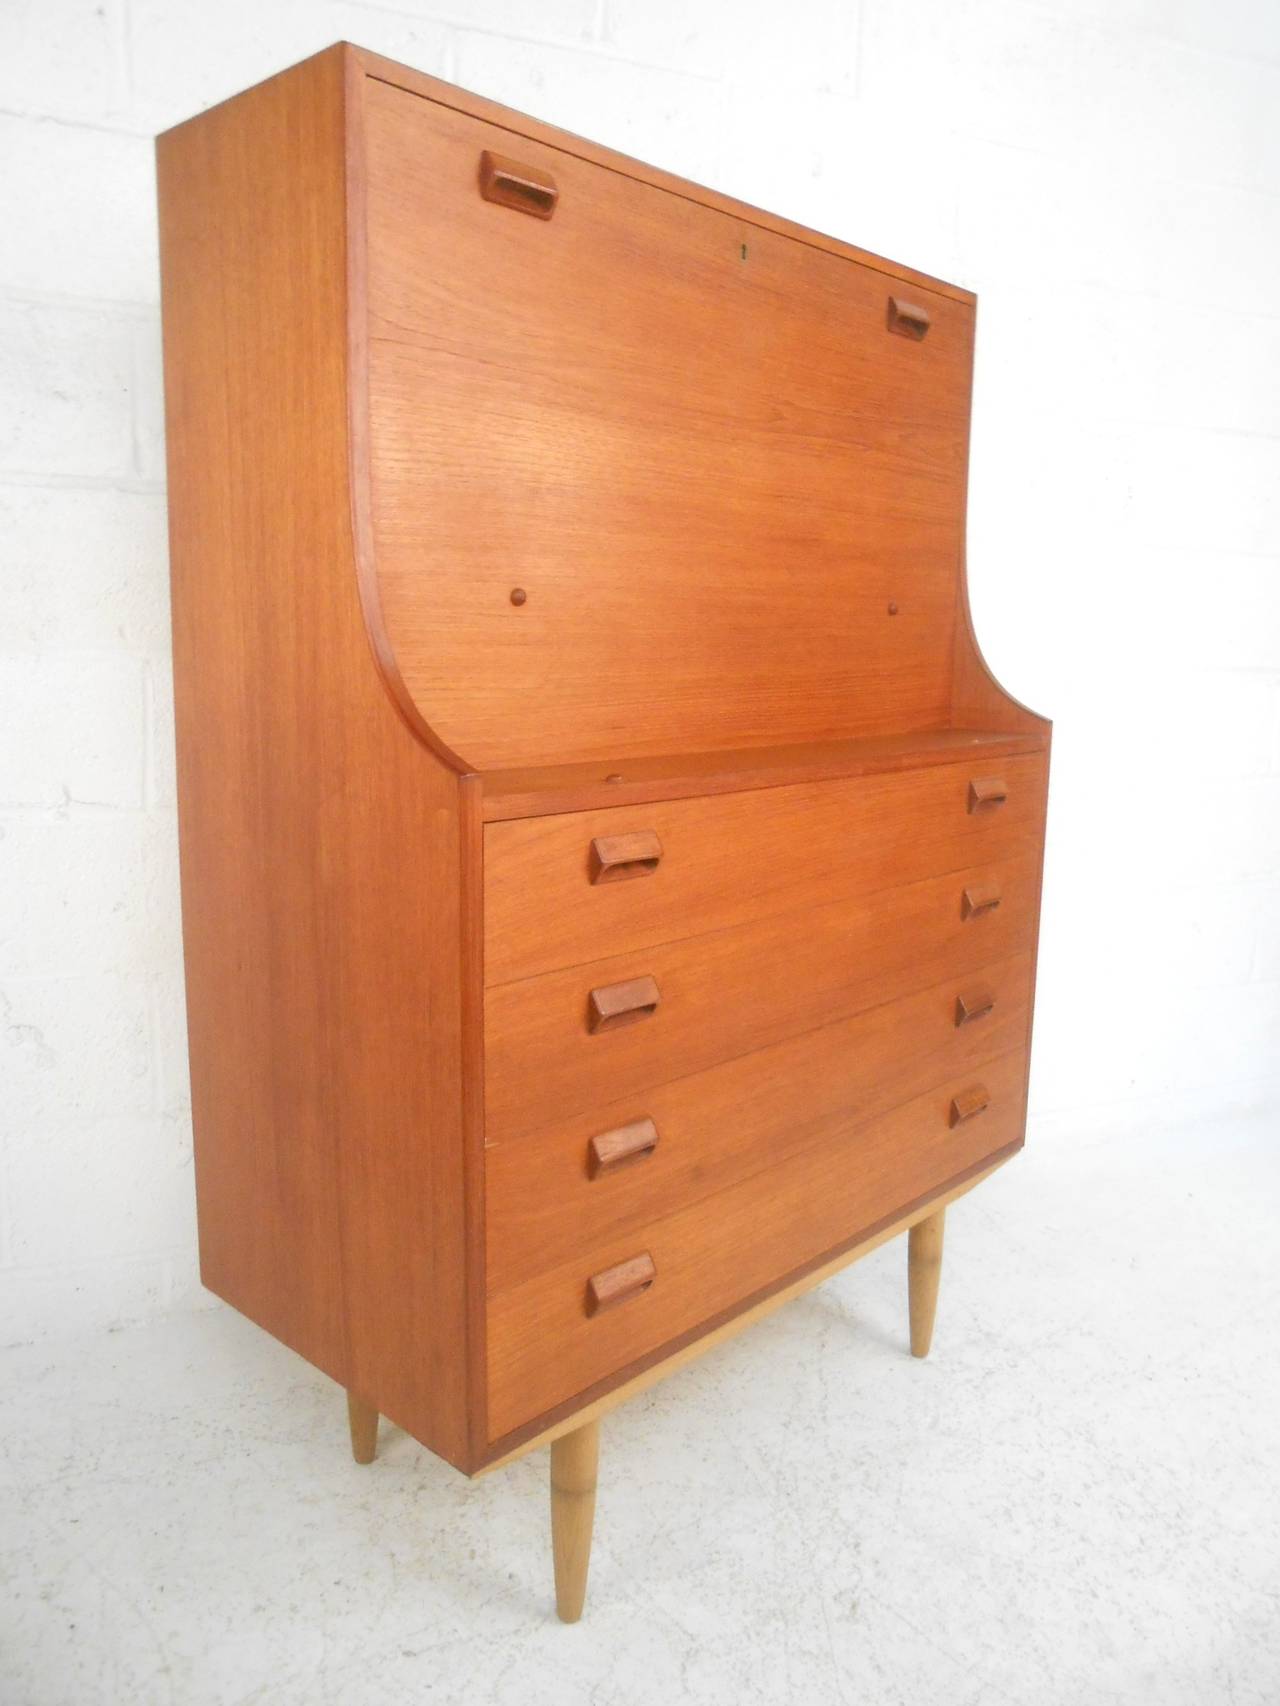 This beautiful teak secretary still has it's original Soborg Mobler manufacturer label. Combining spacious drop-front workspace with plenty of room for organization and storage this piece is the perfect mid-century solution to any interior. Please